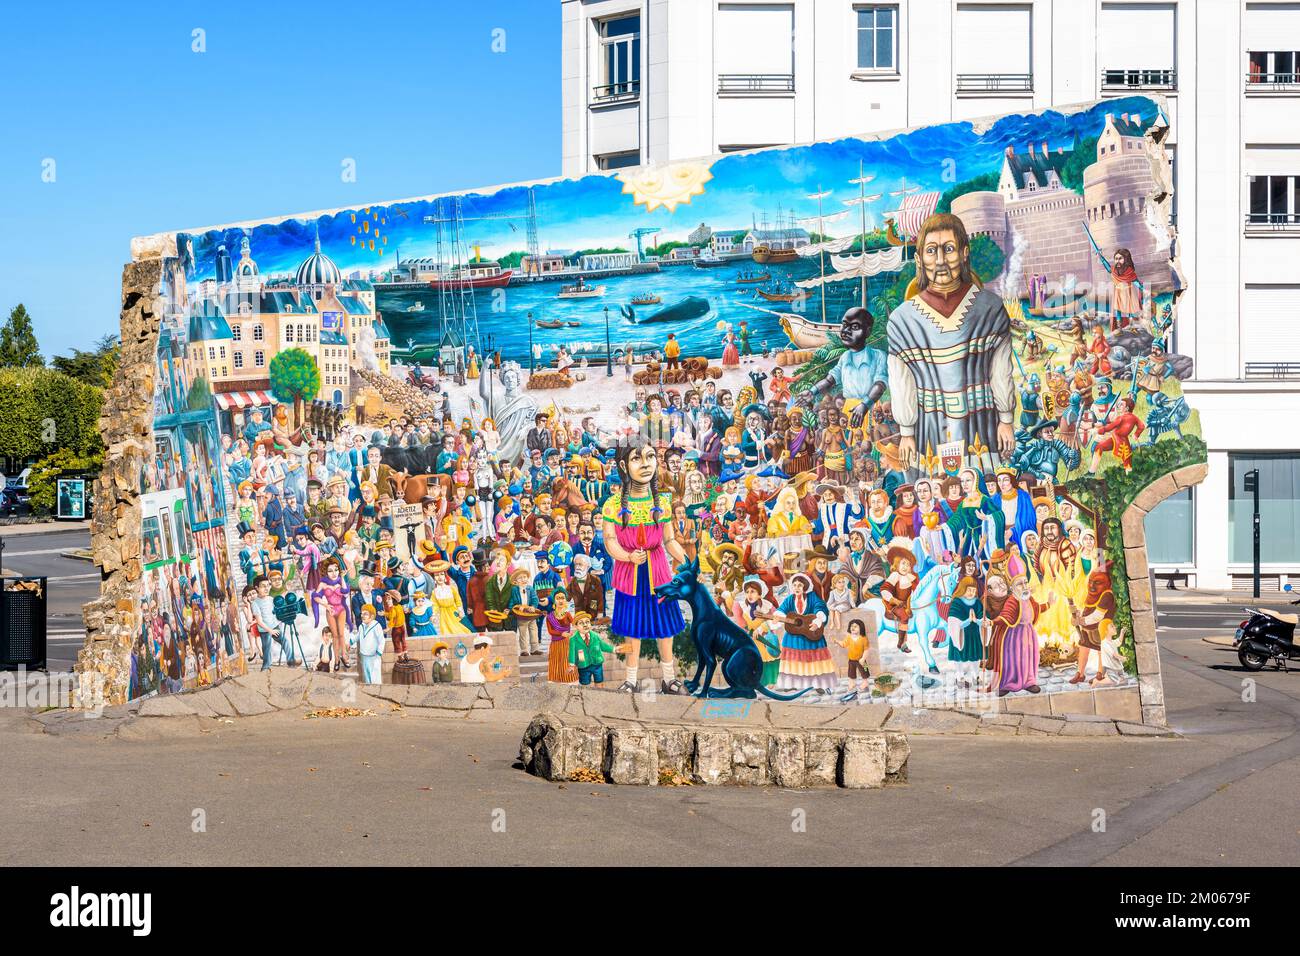 The Royal de Luxe fresco represents about 200 historic figures of Nantes, France, drawn by french illustrator David Bartex in 2014. Stock Photo